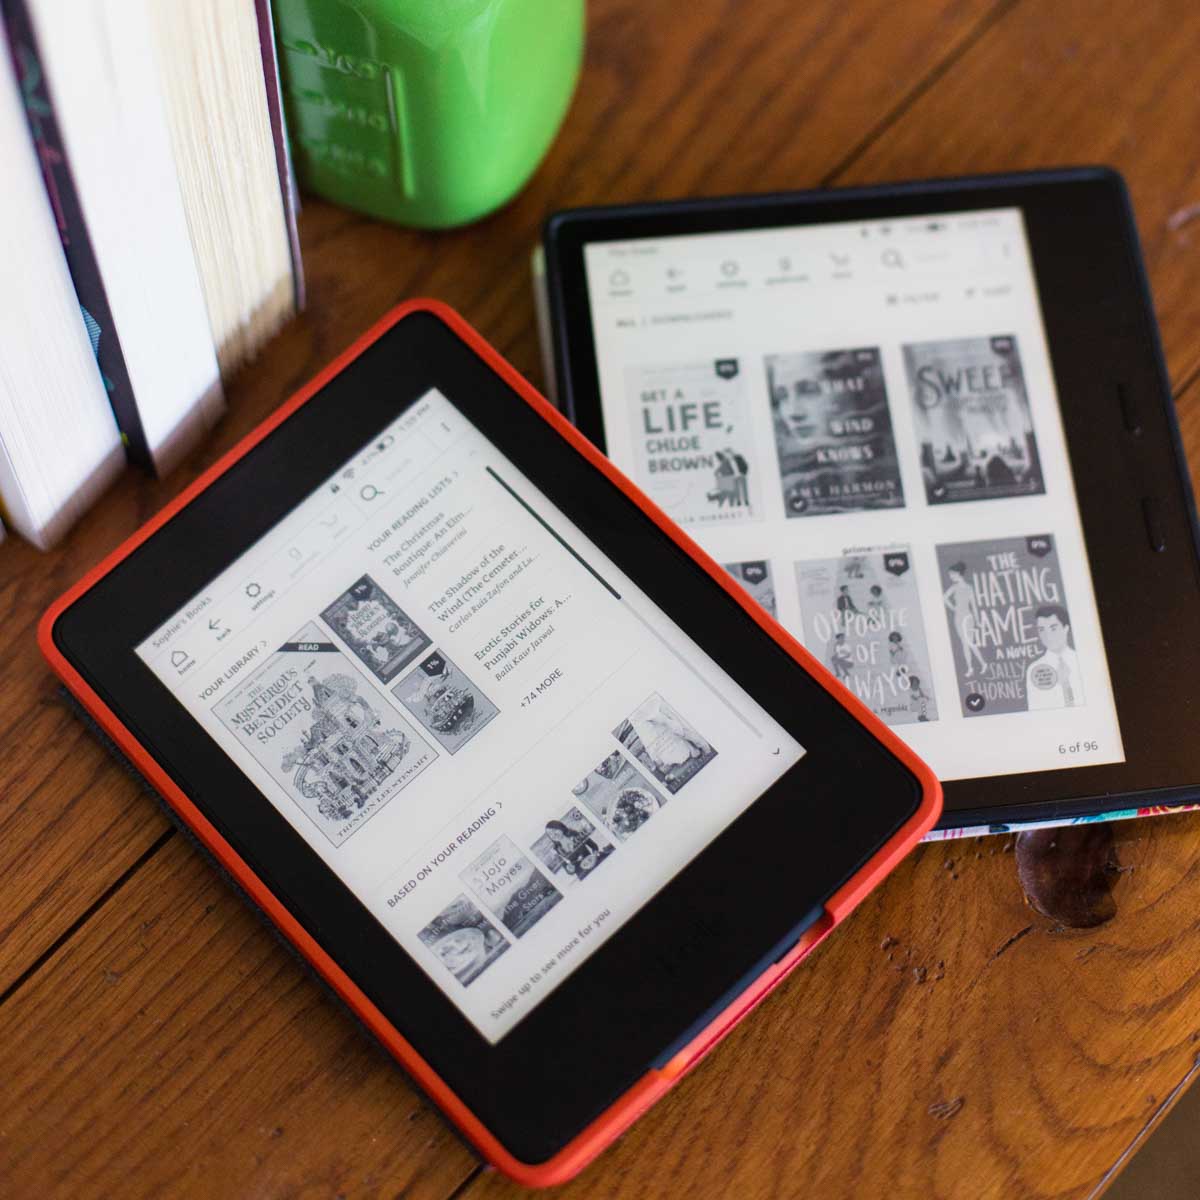 A Kindle Paperwhite and a Kindle Oasis sit on a table together.